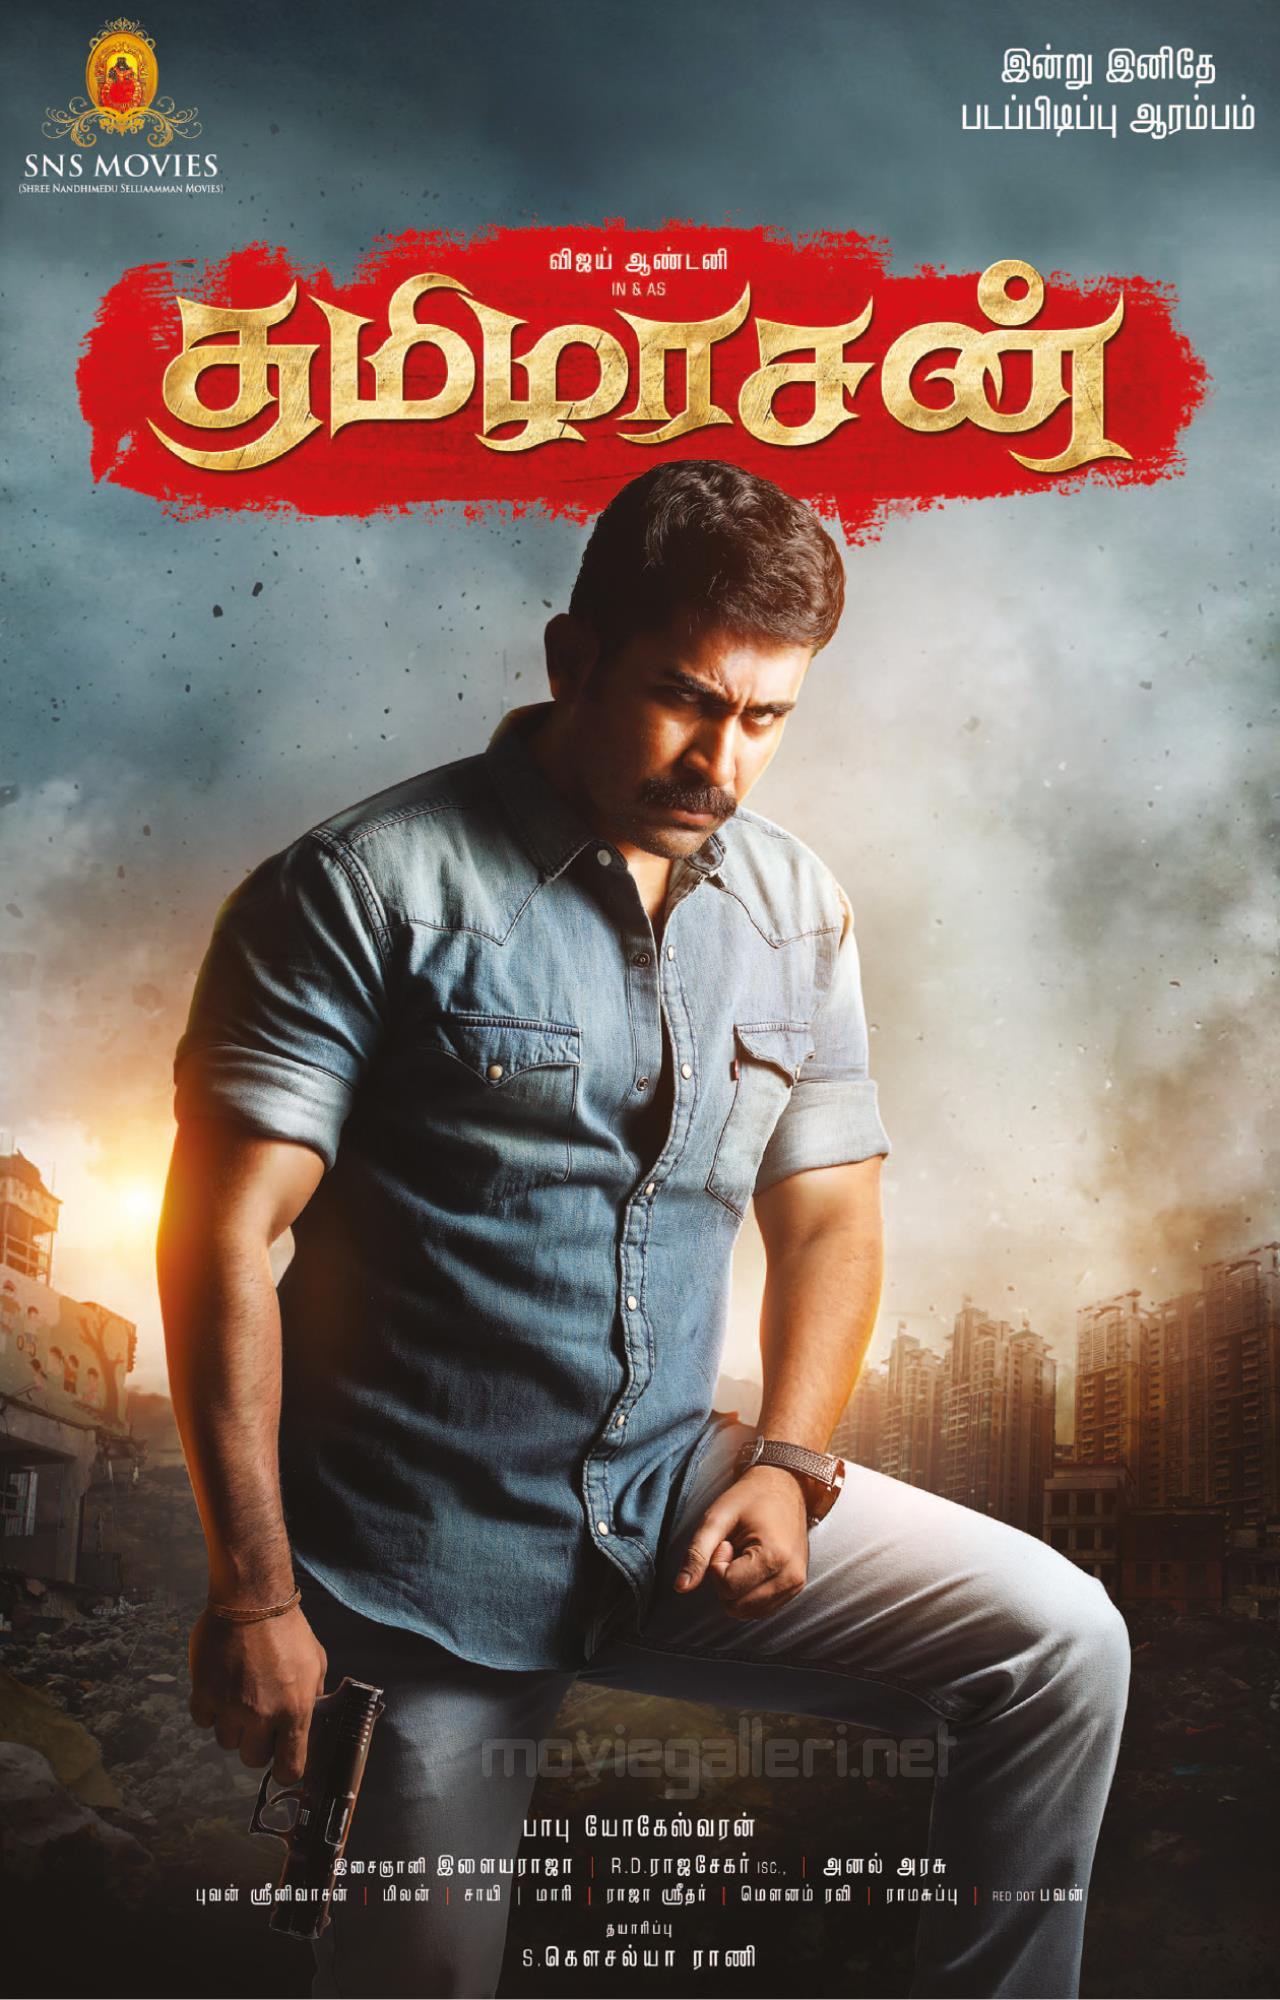 New Tamil Movie Posters 2019